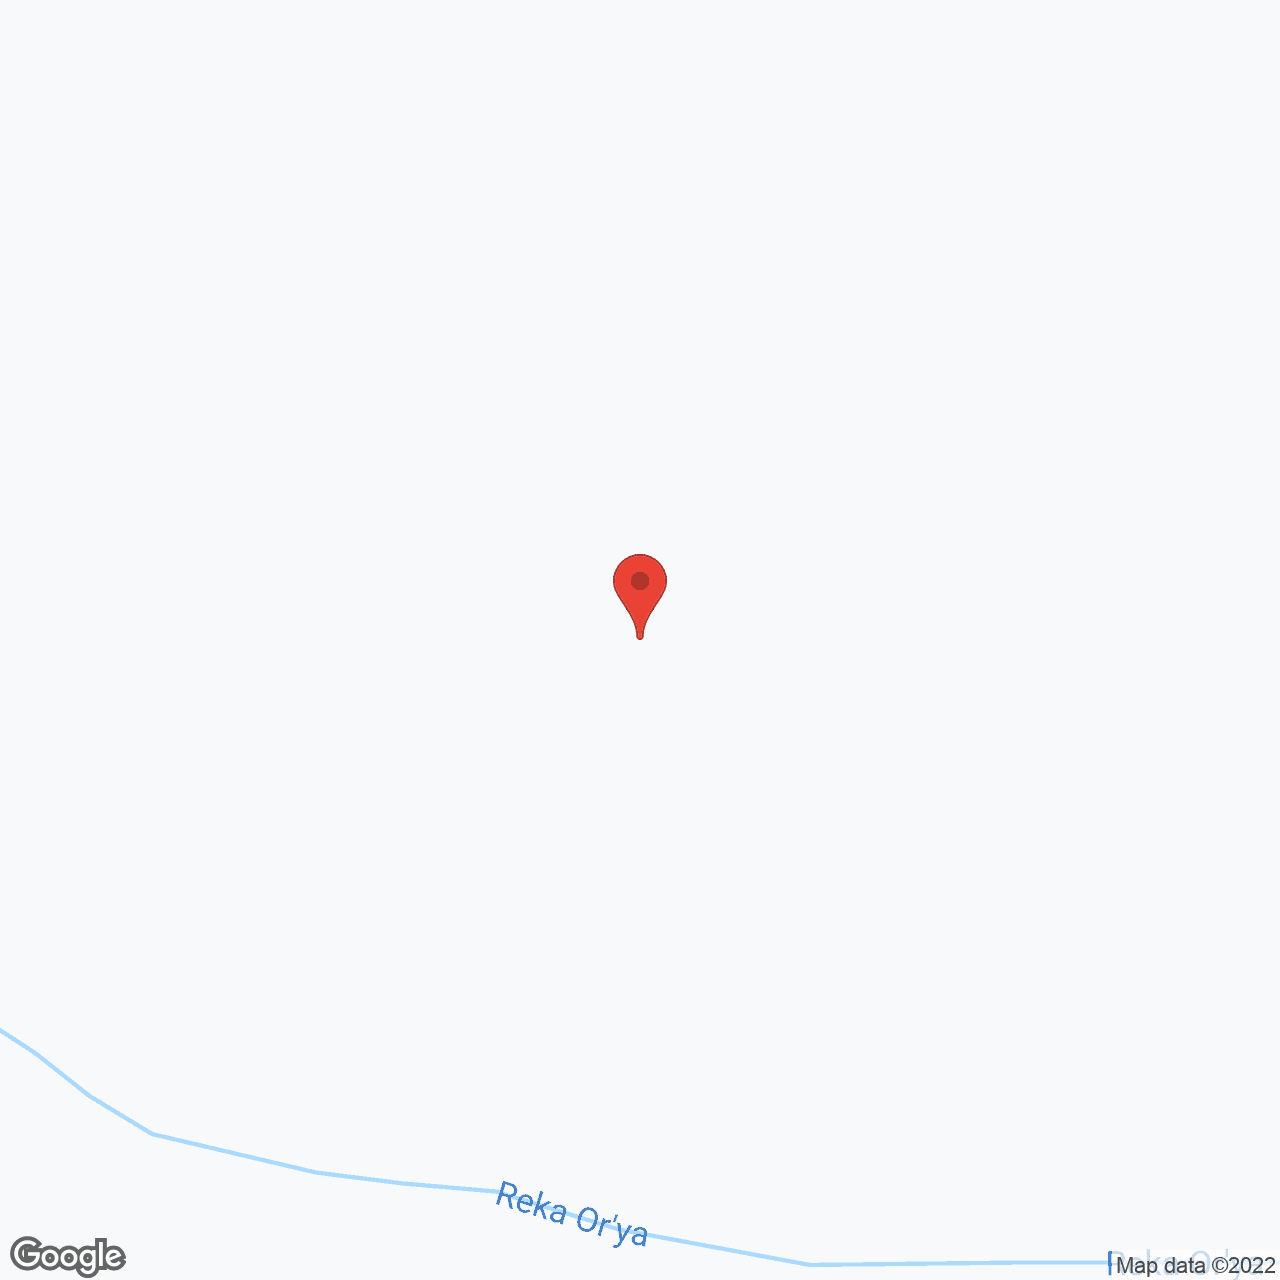 Canada-Test Prop - DO NOT CHANGE/REFER in google map